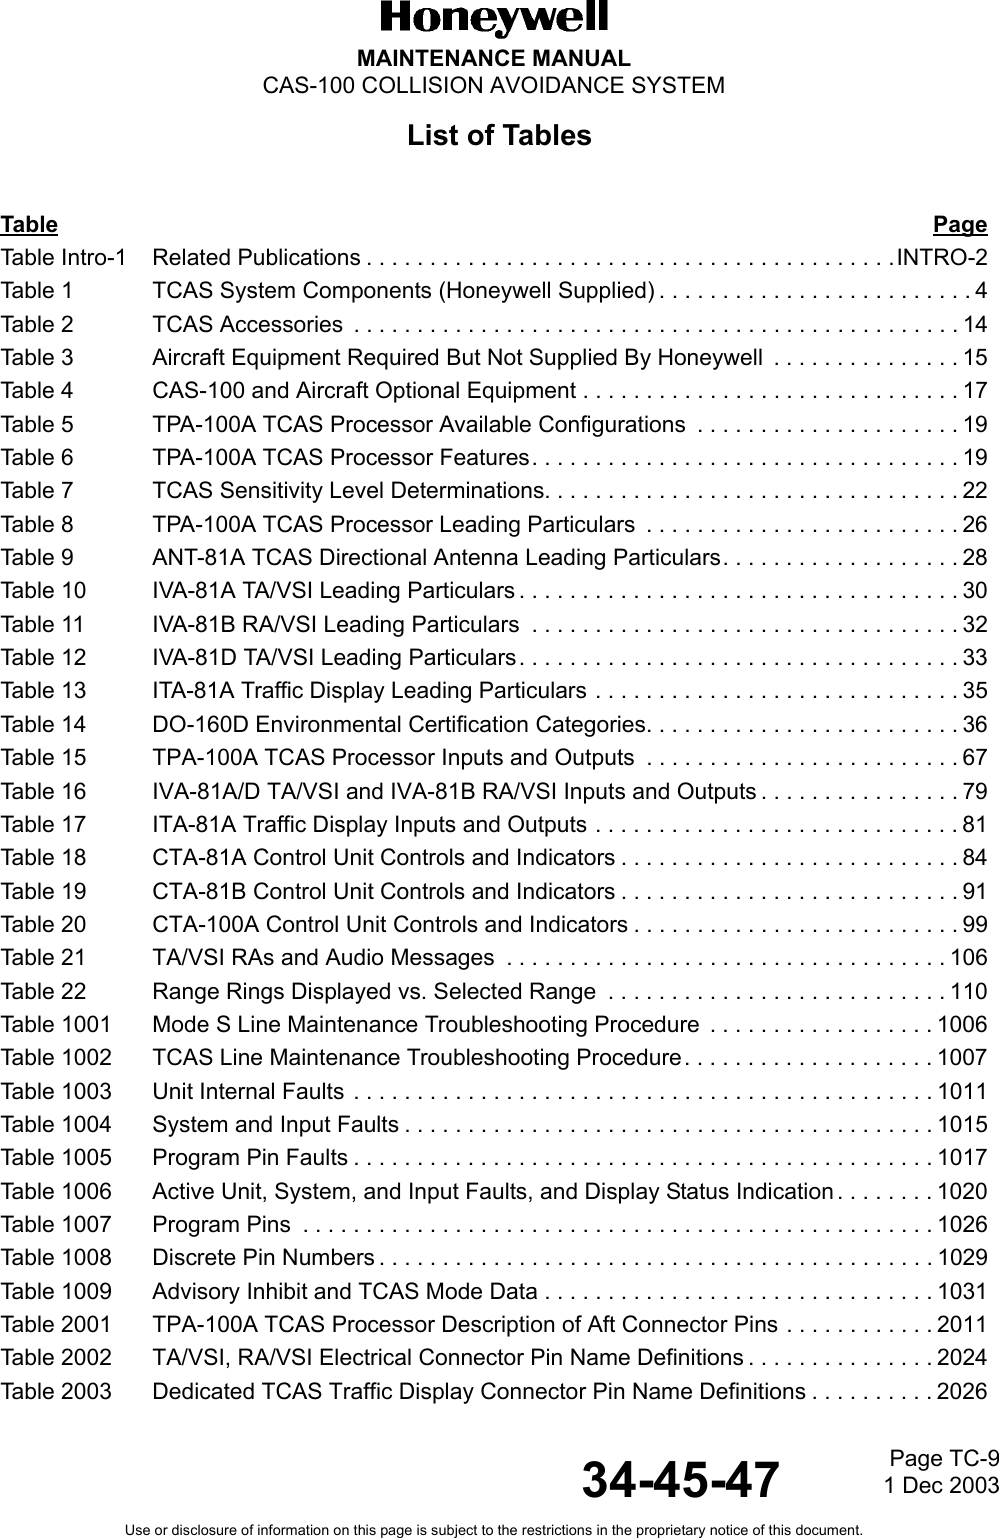 MAINTENANCE MANUALCAS-100 COLLISION AVOIDANCE SYSTEMUse or disclosure of information on this page is subject to the restrictions in the proprietary notice of this document.34-45-47Page TC-91 Dec 2003List of Tables  Table PageTable Intro-1 Related Publications . . . . . . . . . . . . . . . . . . . . . . . . . . . . . . . . . . . . . . . . . .INTRO-2Table 1 TCAS System Components (Honeywell Supplied) . . . . . . . . . . . . . . . . . . . . . . . . . 4Table 2 TCAS Accessories  . . . . . . . . . . . . . . . . . . . . . . . . . . . . . . . . . . . . . . . . . . . . . . . . 14Table 3 Aircraft Equipment Required But Not Supplied By Honeywell  . . . . . . . . . . . . . . . 15Table 4 CAS-100 and Aircraft Optional Equipment . . . . . . . . . . . . . . . . . . . . . . . . . . . . . . 17Table 5 TPA-100A TCAS Processor Available Configurations  . . . . . . . . . . . . . . . . . . . . . 19Table 6 TPA-100A TCAS Processor Features. . . . . . . . . . . . . . . . . . . . . . . . . . . . . . . . . . 19Table 7 TCAS Sensitivity Level Determinations. . . . . . . . . . . . . . . . . . . . . . . . . . . . . . . . . 22Table 8 TPA-100A TCAS Processor Leading Particulars  . . . . . . . . . . . . . . . . . . . . . . . . . 26Table 9 ANT-81A TCAS Directional Antenna Leading Particulars. . . . . . . . . . . . . . . . . . . 28Table 10 IVA-81A TA/VSI Leading Particulars . . . . . . . . . . . . . . . . . . . . . . . . . . . . . . . . . . . 30Table 11 IVA-81B RA/VSI Leading Particulars  . . . . . . . . . . . . . . . . . . . . . . . . . . . . . . . . . . 32Table 12 IVA-81D TA/VSI Leading Particulars. . . . . . . . . . . . . . . . . . . . . . . . . . . . . . . . . . . 33Table 13 ITA-81A Traffic Display Leading Particulars . . . . . . . . . . . . . . . . . . . . . . . . . . . . . 35Table 14 DO-160D Environmental Certification Categories. . . . . . . . . . . . . . . . . . . . . . . . . 36Table 15 TPA-100A TCAS Processor Inputs and Outputs  . . . . . . . . . . . . . . . . . . . . . . . . . 67Table 16 IVA-81A/D TA/VSI and IVA-81B RA/VSI Inputs and Outputs . . . . . . . . . . . . . . . . 79Table 17 ITA-81A Traffic Display Inputs and Outputs . . . . . . . . . . . . . . . . . . . . . . . . . . . . . 81Table 18 CTA-81A Control Unit Controls and Indicators . . . . . . . . . . . . . . . . . . . . . . . . . . . 84Table 19 CTA-81B Control Unit Controls and Indicators . . . . . . . . . . . . . . . . . . . . . . . . . . . 91Table 20 CTA-100A Control Unit Controls and Indicators . . . . . . . . . . . . . . . . . . . . . . . . . . 99Table 21 TA/VSI RAs and Audio Messages  . . . . . . . . . . . . . . . . . . . . . . . . . . . . . . . . . . . 106Table 22 Range Rings Displayed vs. Selected Range  . . . . . . . . . . . . . . . . . . . . . . . . . . . 110Table 1001 Mode S Line Maintenance Troubleshooting Procedure  . . . . . . . . . . . . . . . . . . 1006Table 1002 TCAS Line Maintenance Troubleshooting Procedure. . . . . . . . . . . . . . . . . . . . 1007Table 1003 Unit Internal Faults . . . . . . . . . . . . . . . . . . . . . . . . . . . . . . . . . . . . . . . . . . . . . . 1011Table 1004 System and Input Faults . . . . . . . . . . . . . . . . . . . . . . . . . . . . . . . . . . . . . . . . . . 1015Table 1005 Program Pin Faults . . . . . . . . . . . . . . . . . . . . . . . . . . . . . . . . . . . . . . . . . . . . . . 1017Table 1006 Active Unit, System, and Input Faults, and Display Status Indication . . . . . . . . 1020Table 1007 Program Pins  . . . . . . . . . . . . . . . . . . . . . . . . . . . . . . . . . . . . . . . . . . . . . . . . . . 1026Table 1008 Discrete Pin Numbers . . . . . . . . . . . . . . . . . . . . . . . . . . . . . . . . . . . . . . . . . . . . 1029Table 1009 Advisory Inhibit and TCAS Mode Data . . . . . . . . . . . . . . . . . . . . . . . . . . . . . . . 1031Table 2001 TPA-100A TCAS Processor Description of Aft Connector Pins . . . . . . . . . . . . 2011Table 2002 TA/VSI, RA/VSI Electrical Connector Pin Name Definitions . . . . . . . . . . . . . . . 2024Table 2003 Dedicated TCAS Traffic Display Connector Pin Name Definitions . . . . . . . . . . 2026